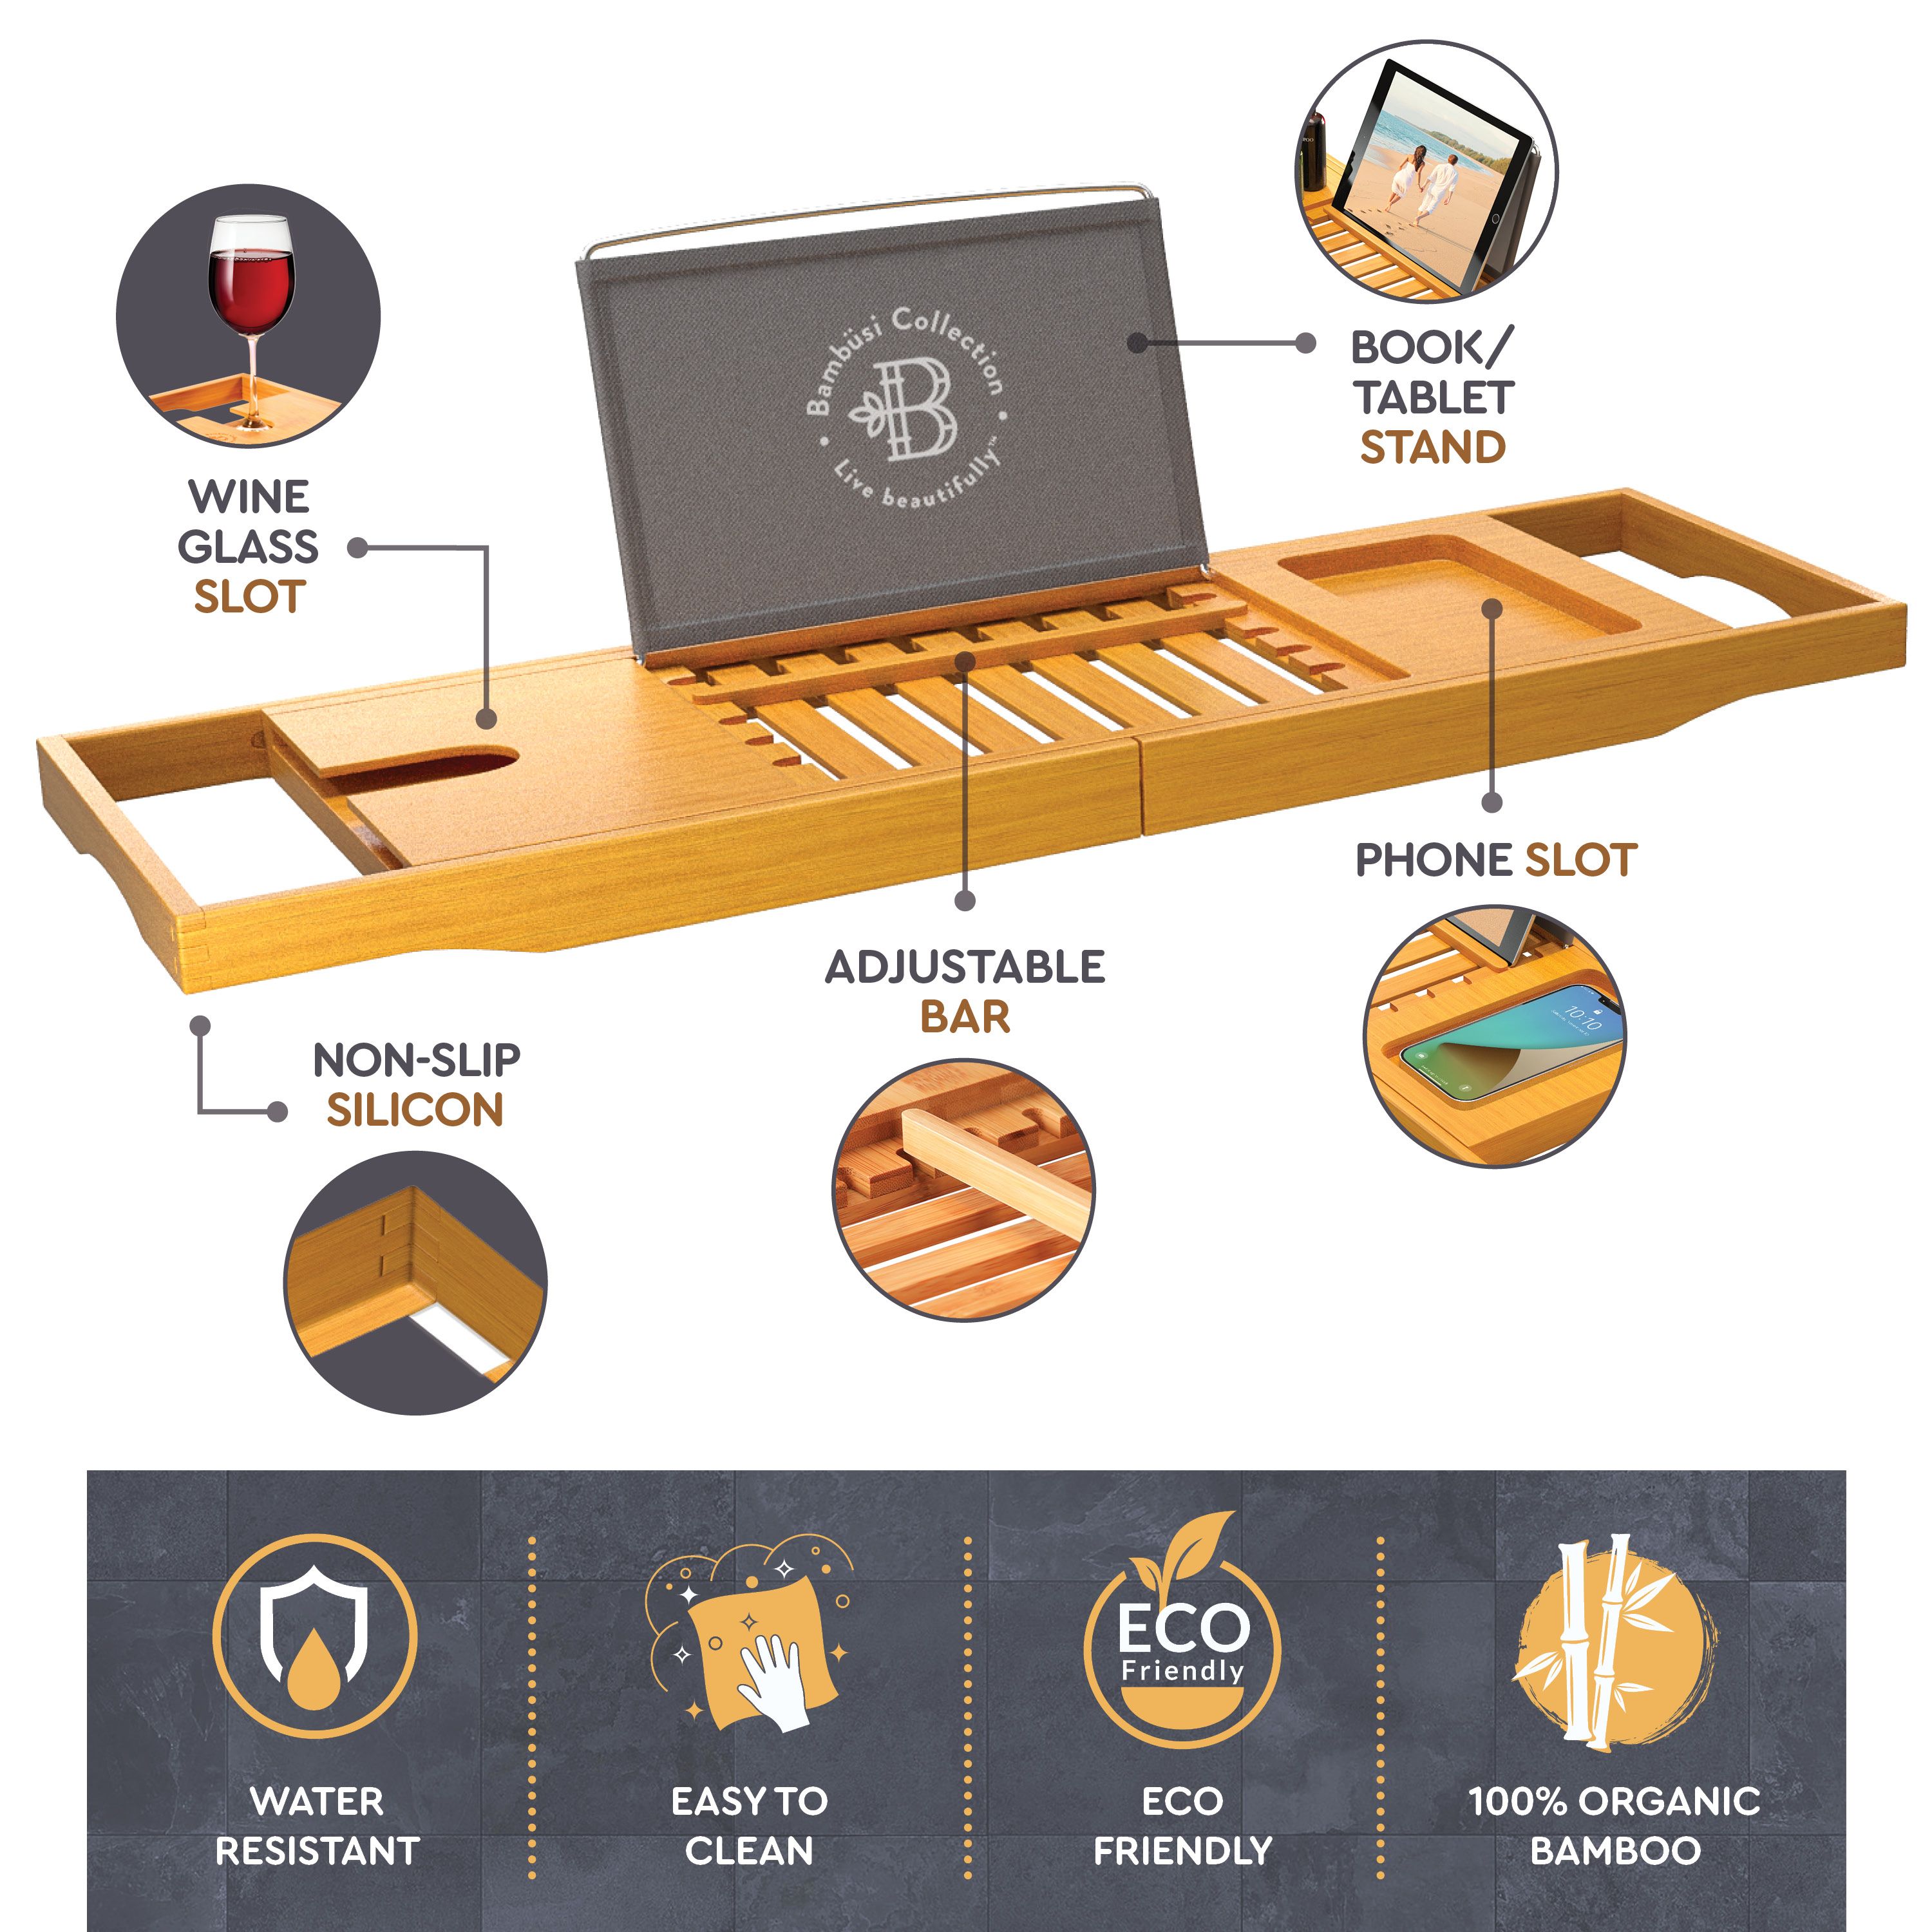 Bambusi Bamboo Bathtub Tray With Extending Sides, Reading Rack, Tablet Holder, Cellphone Tray & Integrated Wine Glass Holder. - image 3 of 8